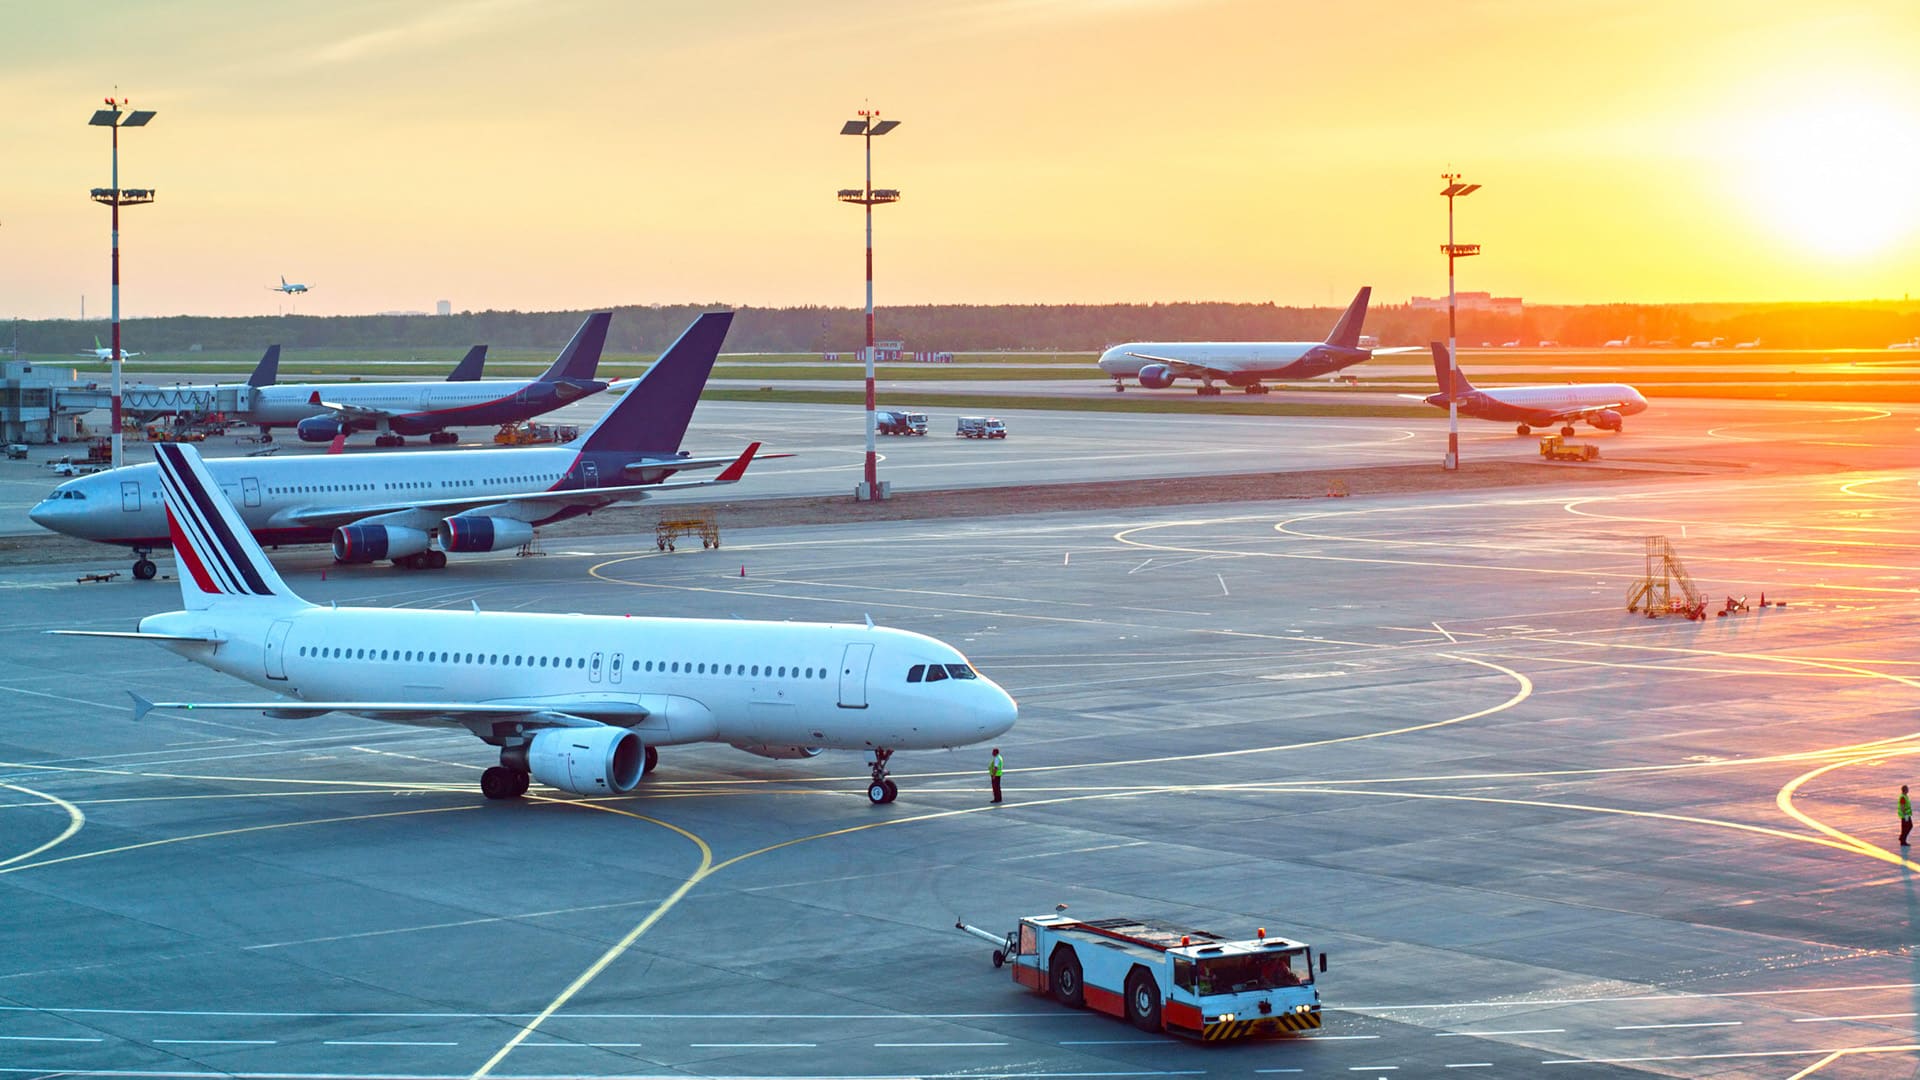 International air travel in 2021 will be just 22 pc of 2019 levels; remains in deep crisis: IATA